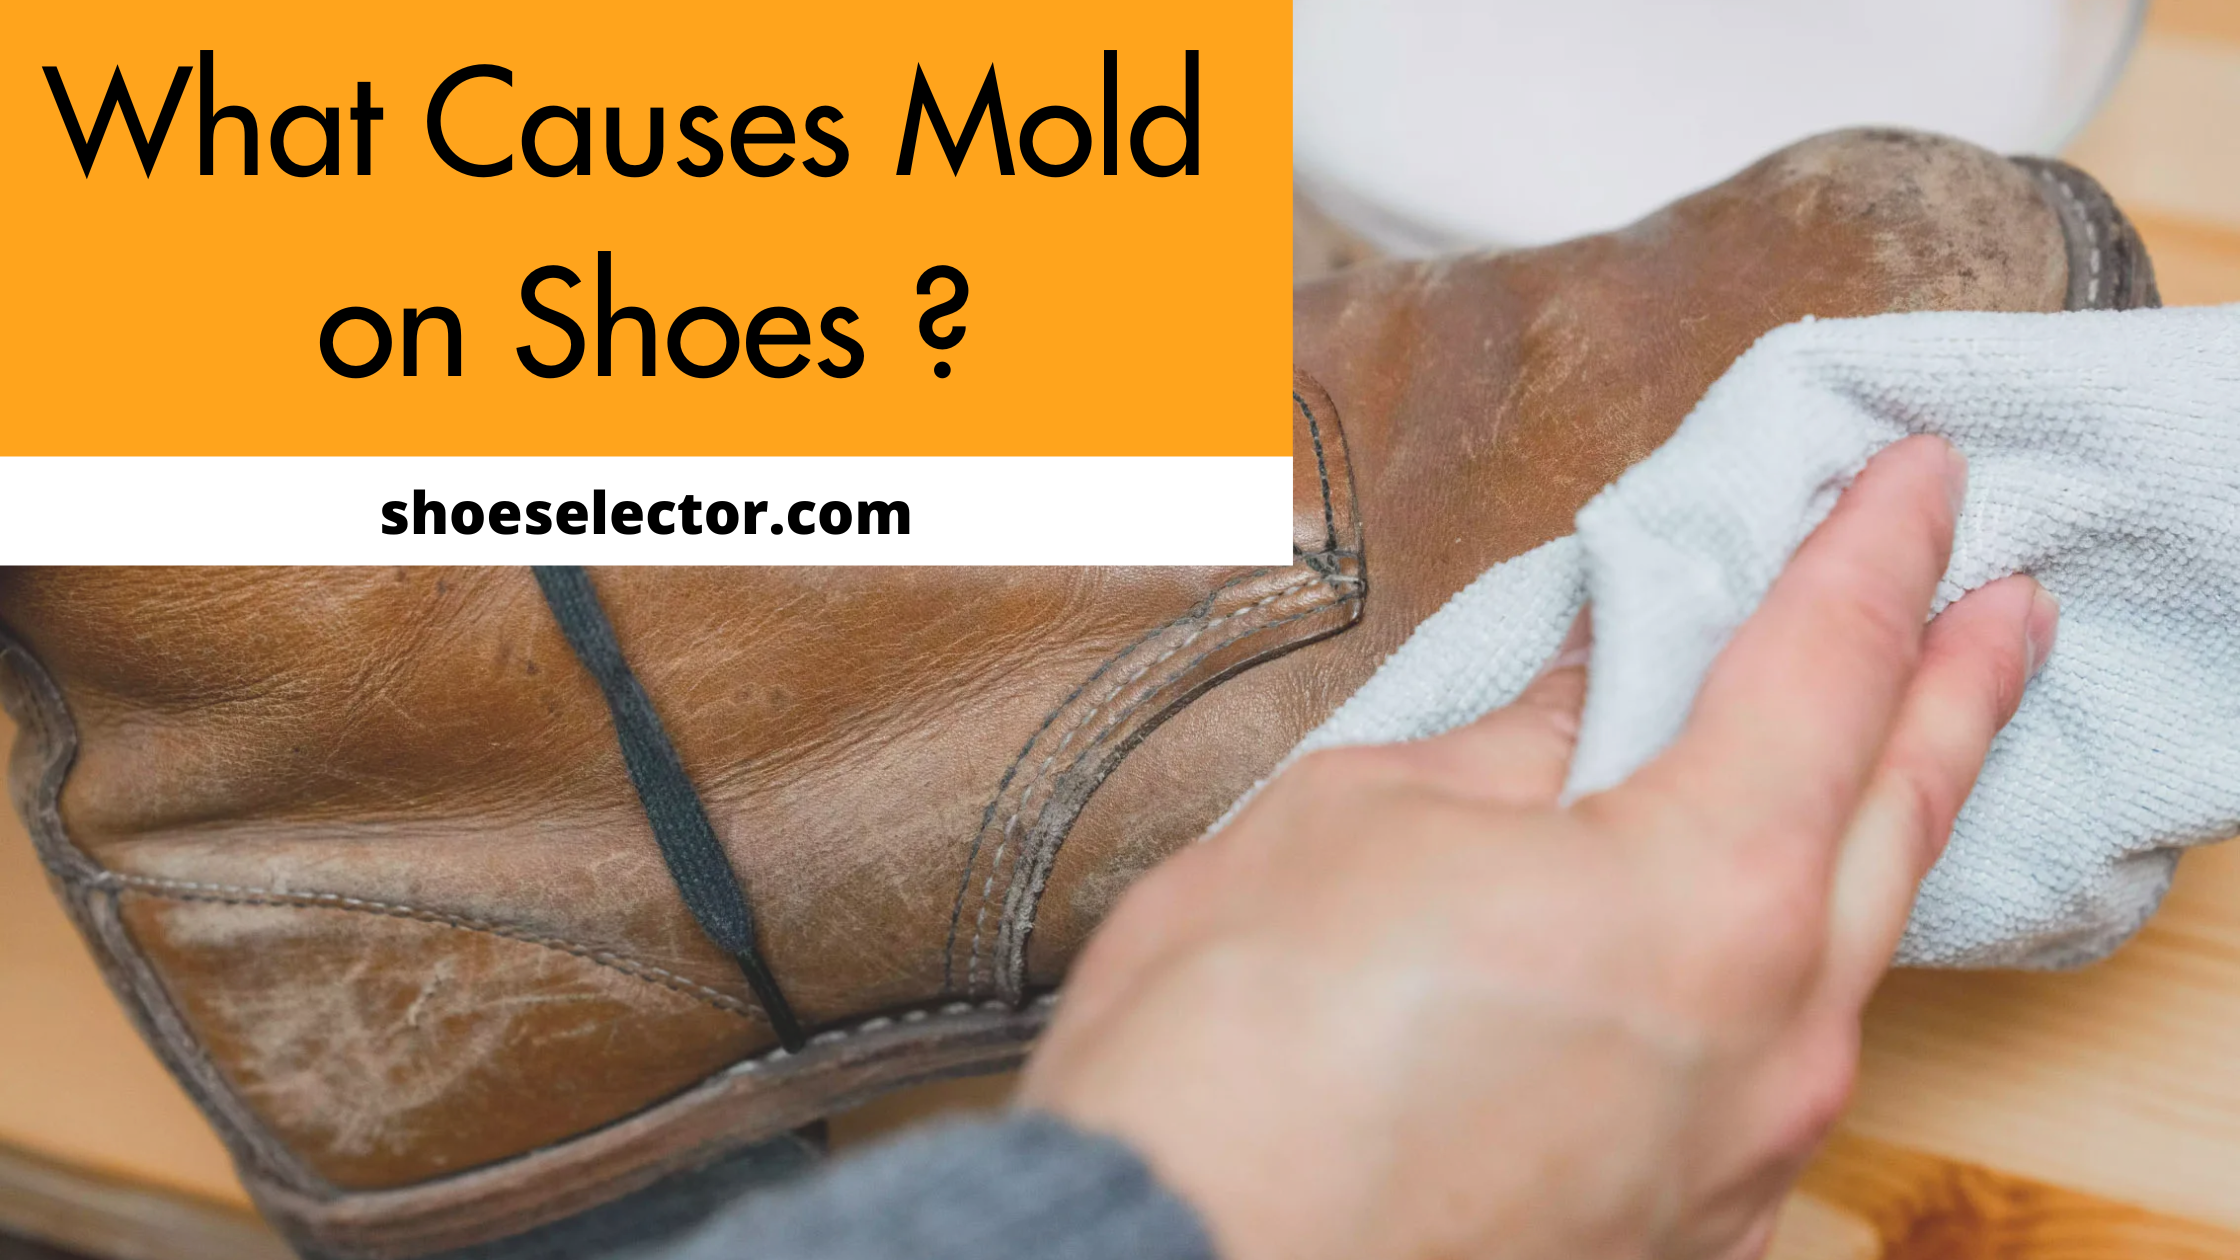 What Causes Mold On Shoes? - Recommended Guide